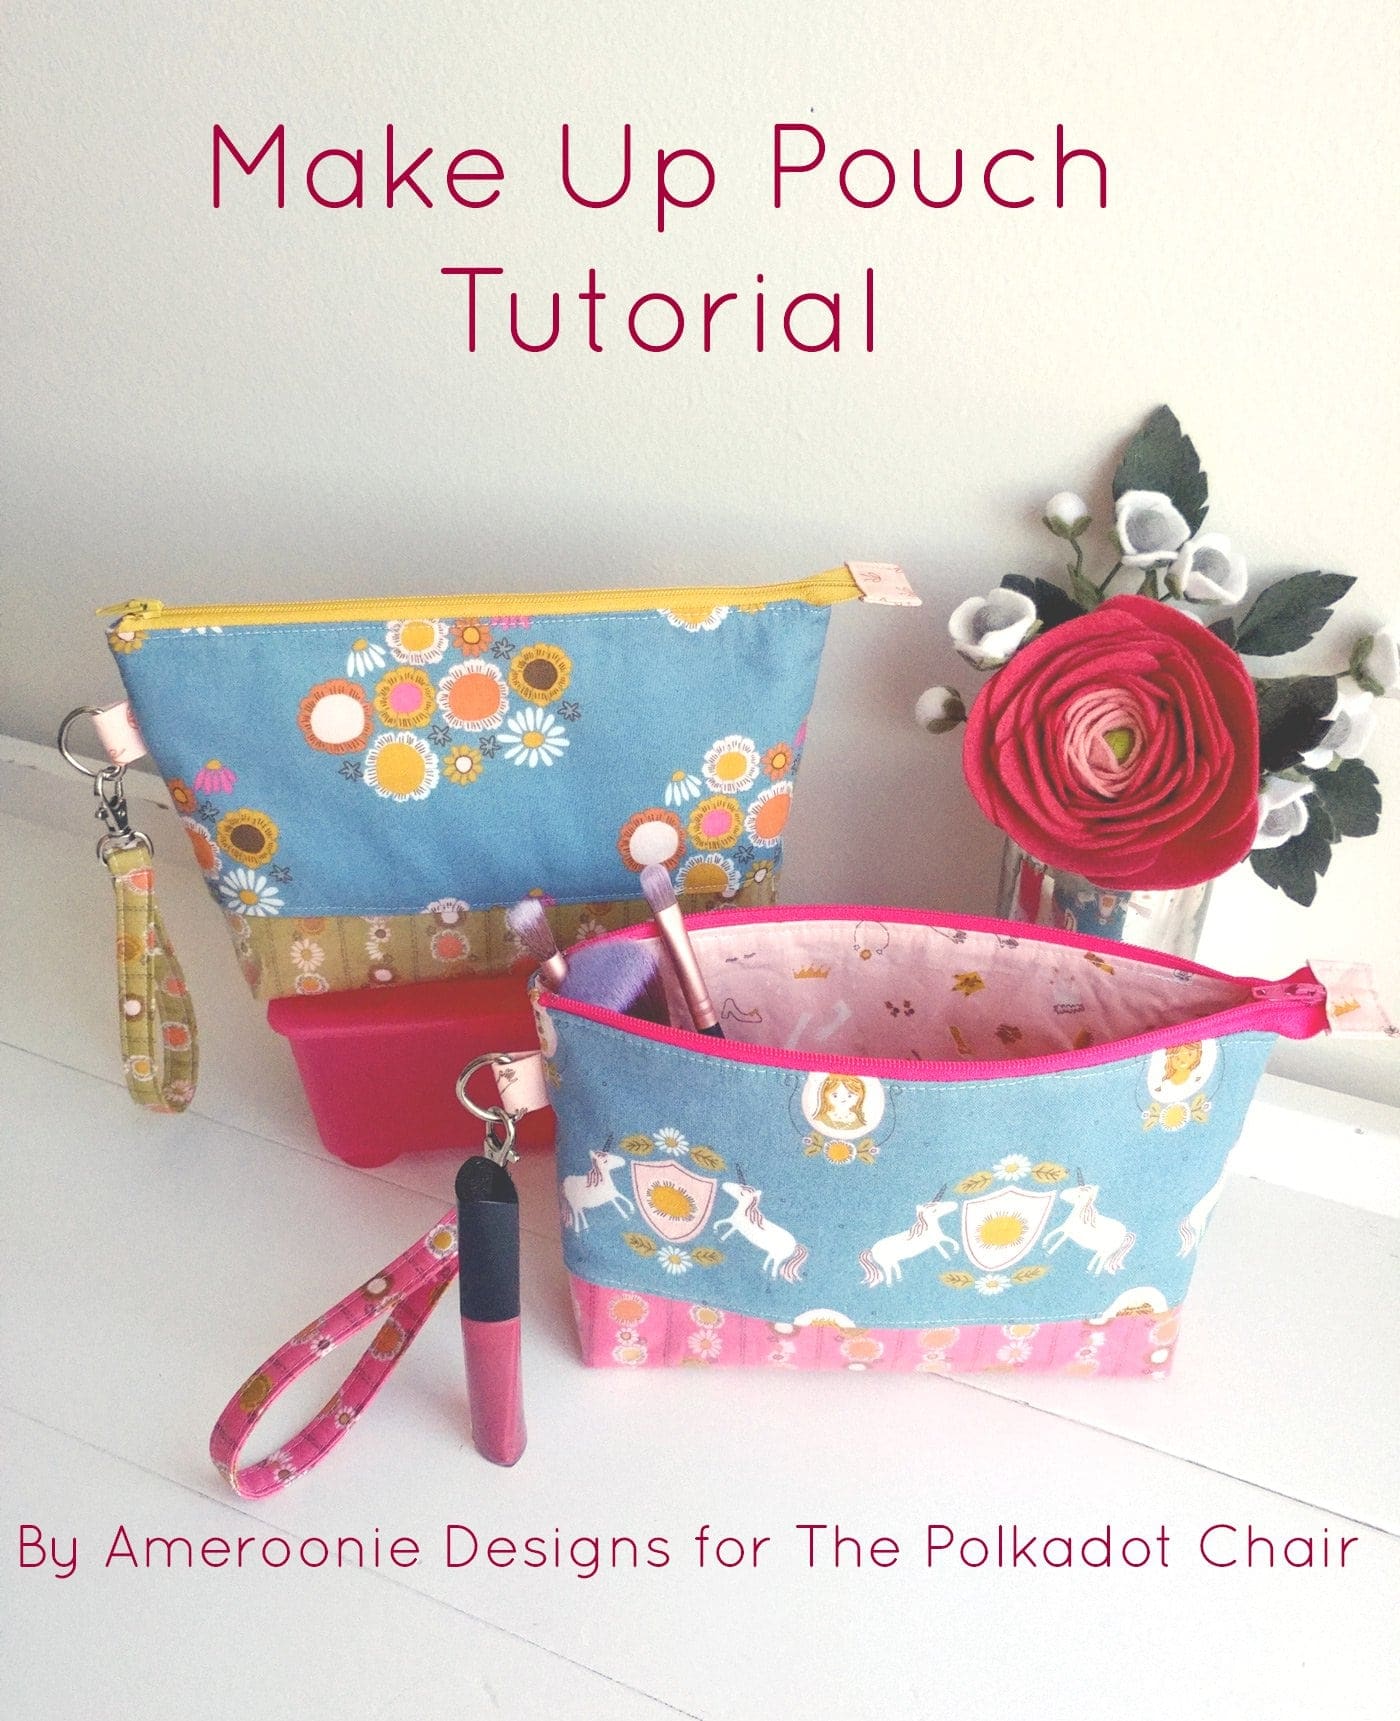 How to Sew a See-Through Tote: Free Fabric and Vinyl Bag Pattern